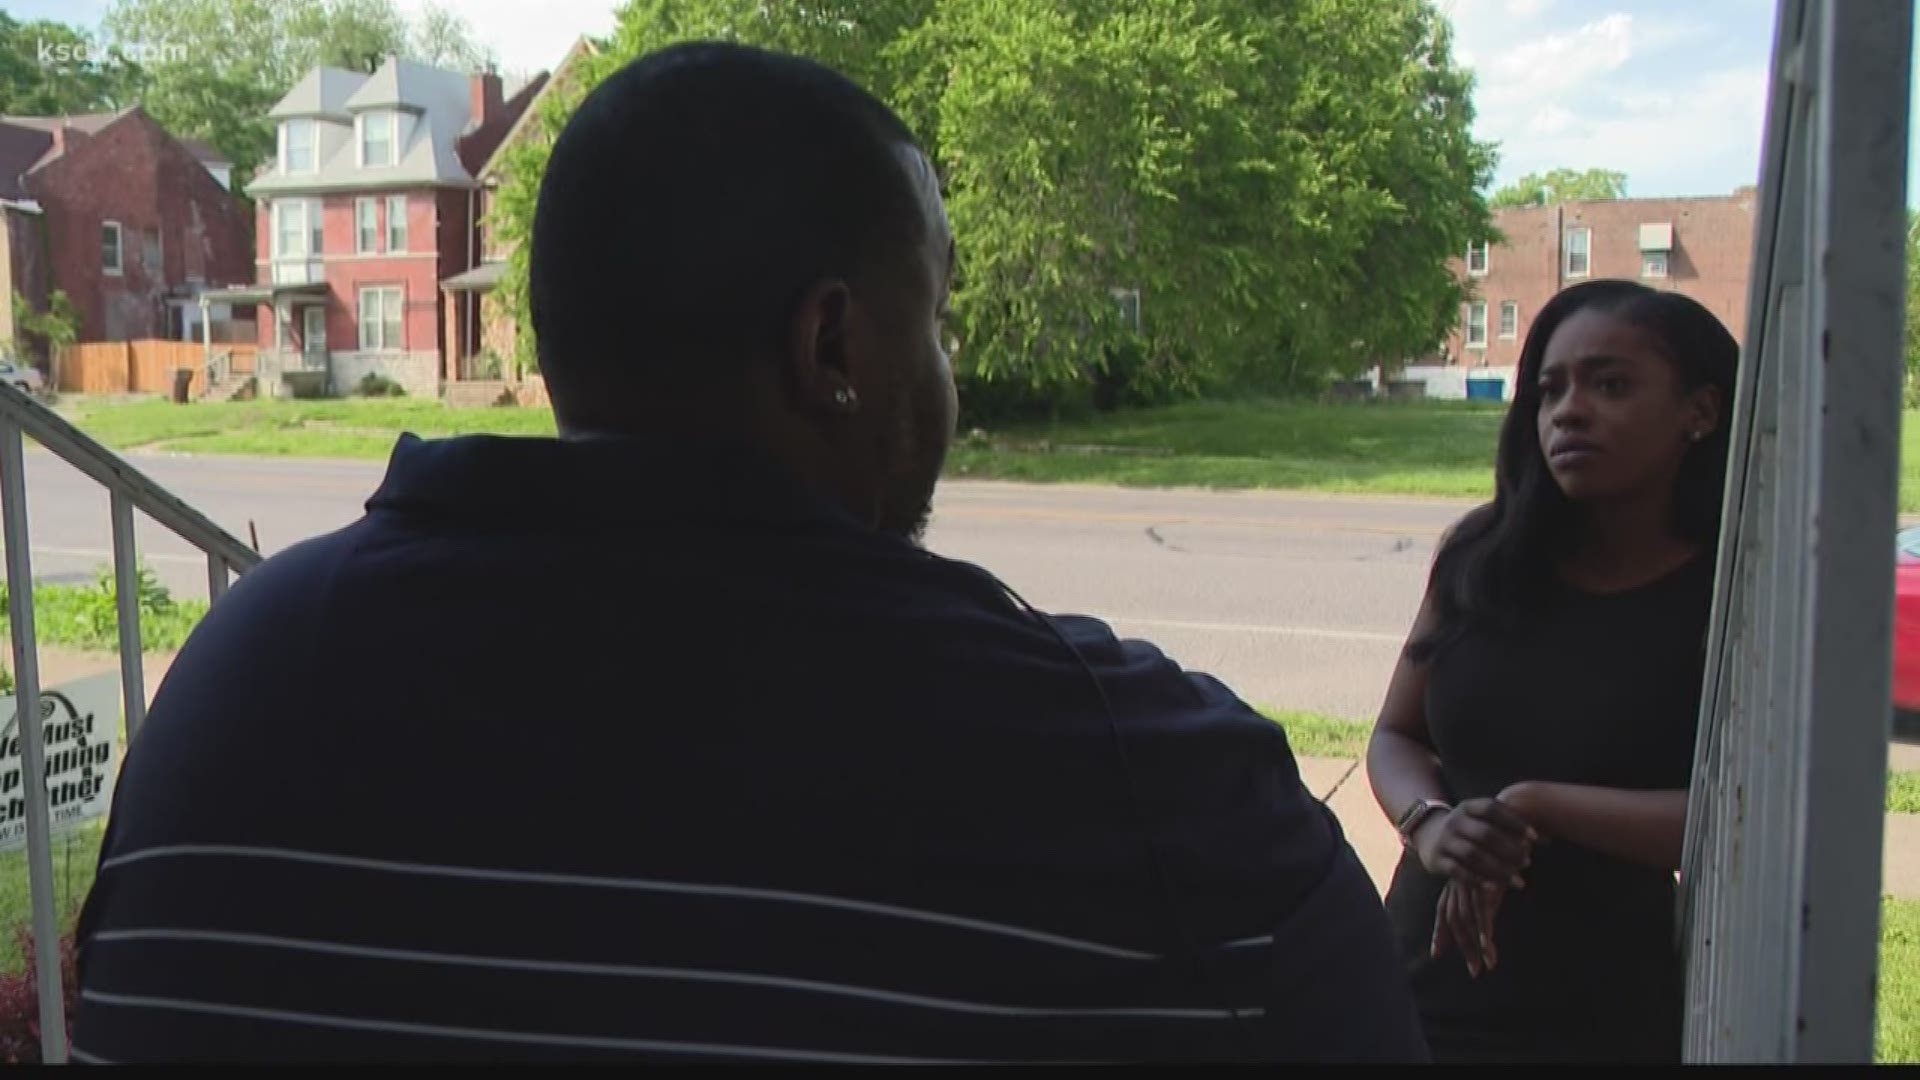 Two people are dead and 10 others injured after several shootings overnight in St. Louis. Jasmine Payoute spoke with a resident who fears this Memorial Day weekend is just the tip of the iceberg.